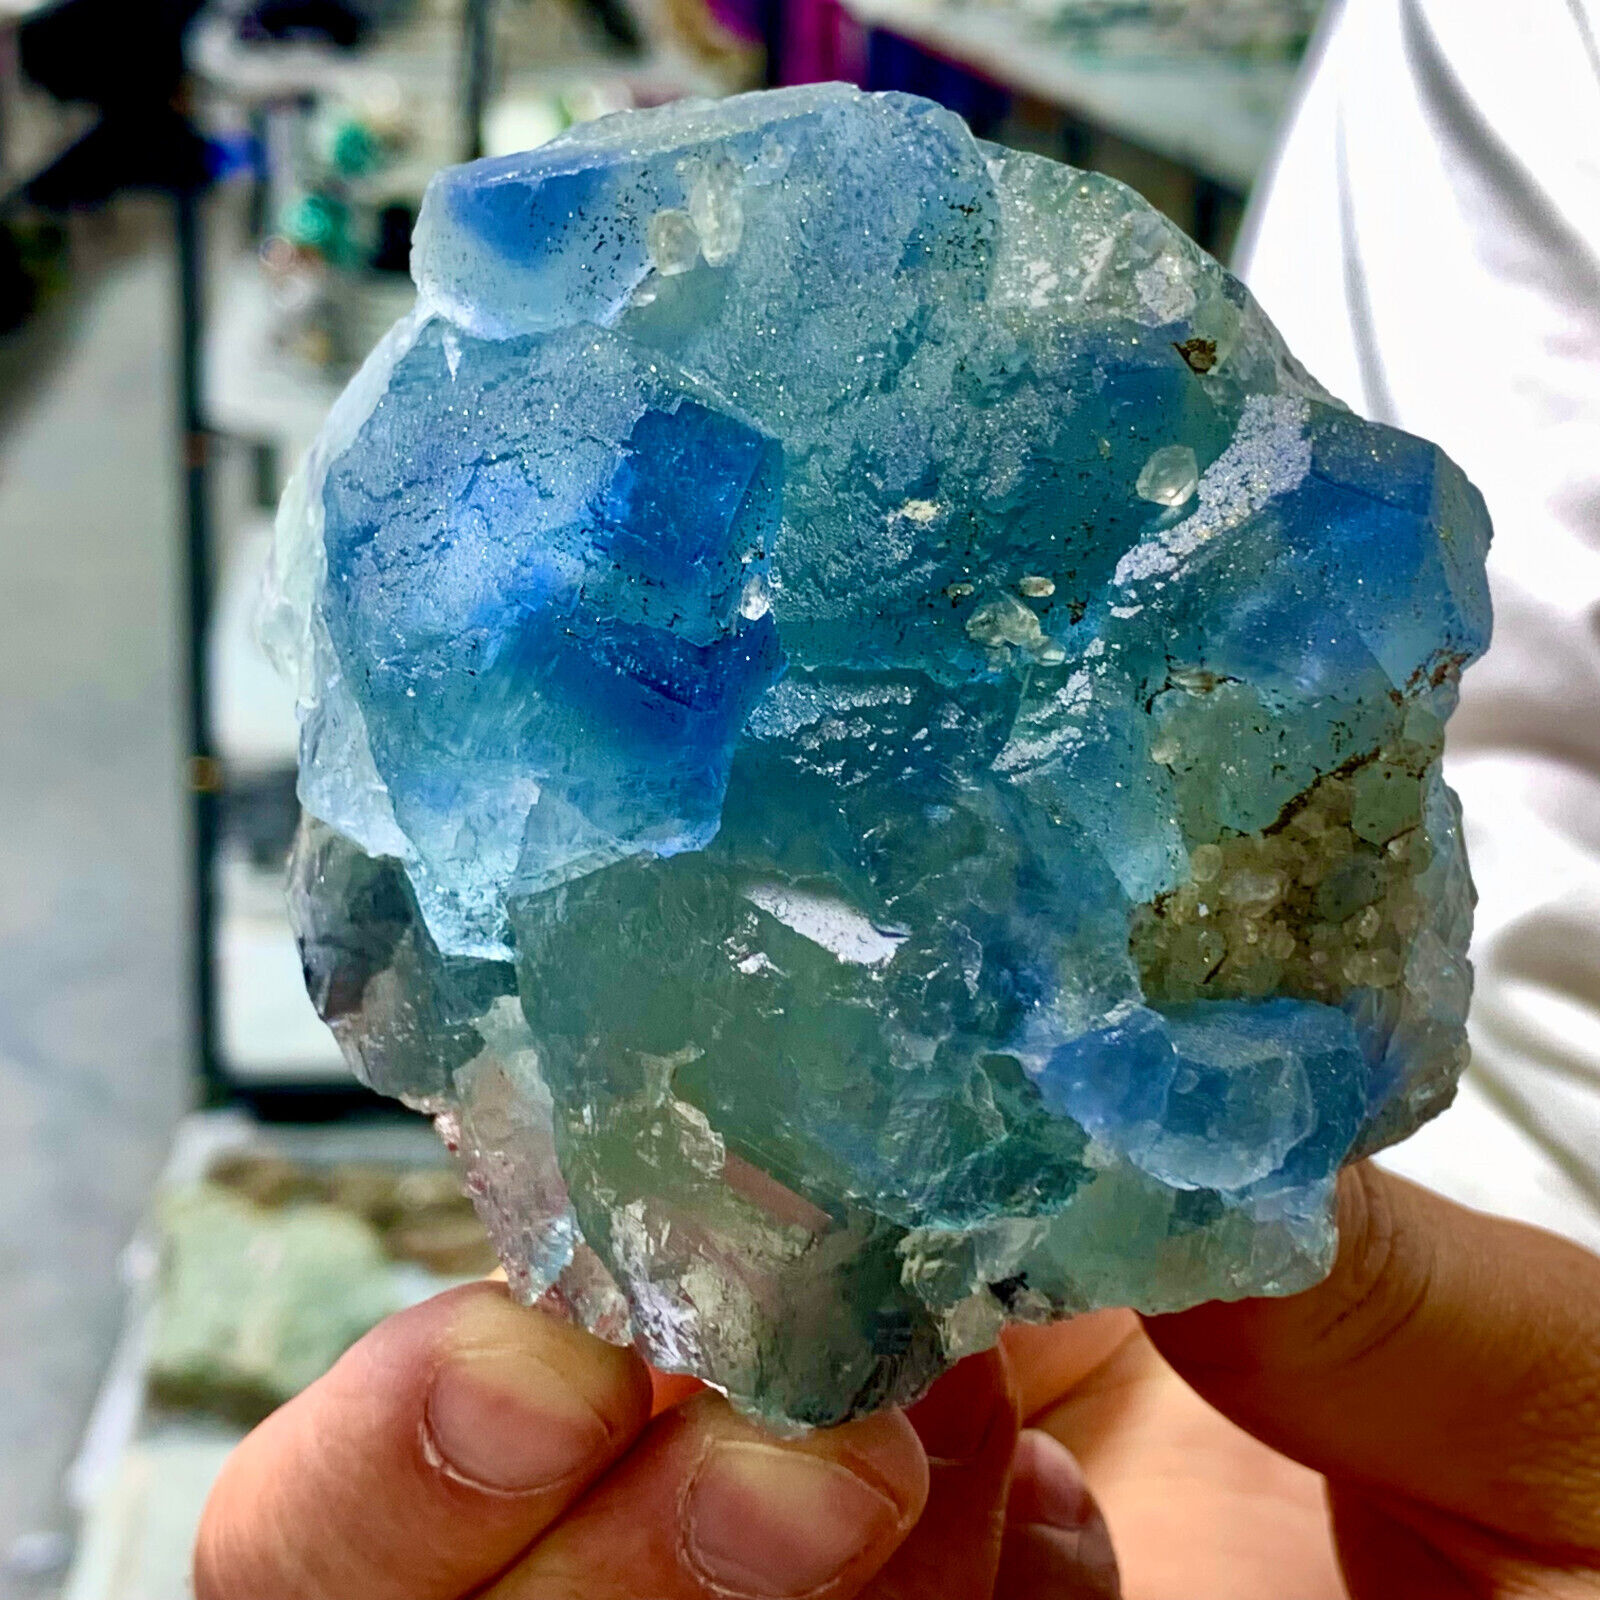 483G Rare transparent blue cubic fluorite mineral crystal sample / China